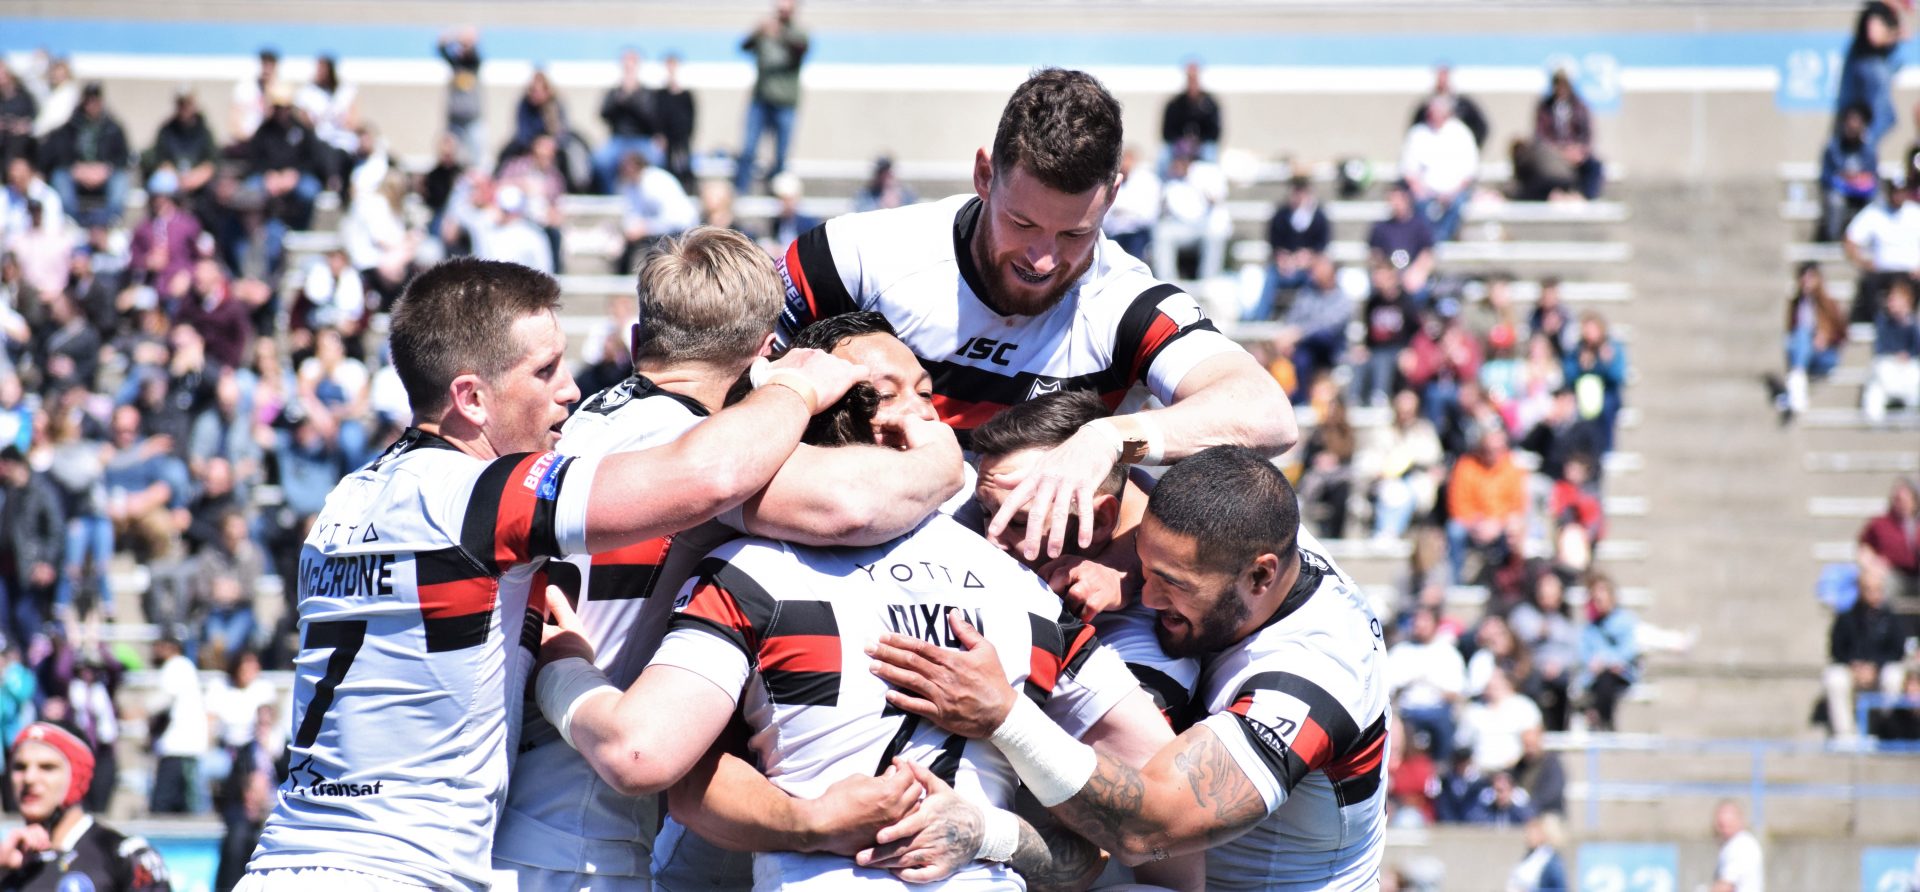 The Toronto Wolfpack celebrating one of their many tries in match against Swinton Lions.